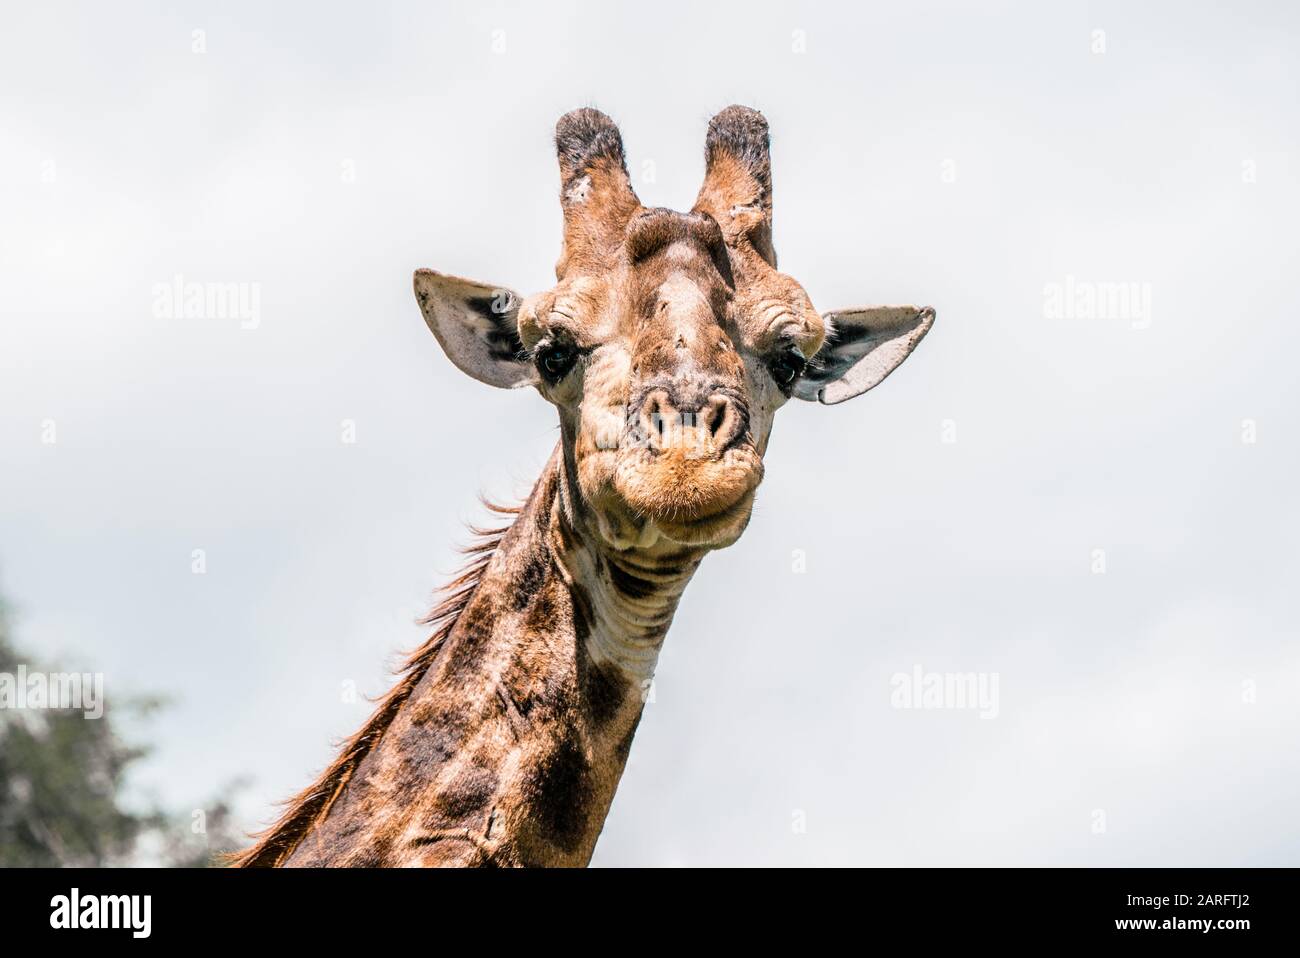 Giraffe looks into camera and smiles. Kruger National Park South Africa Stock Photo